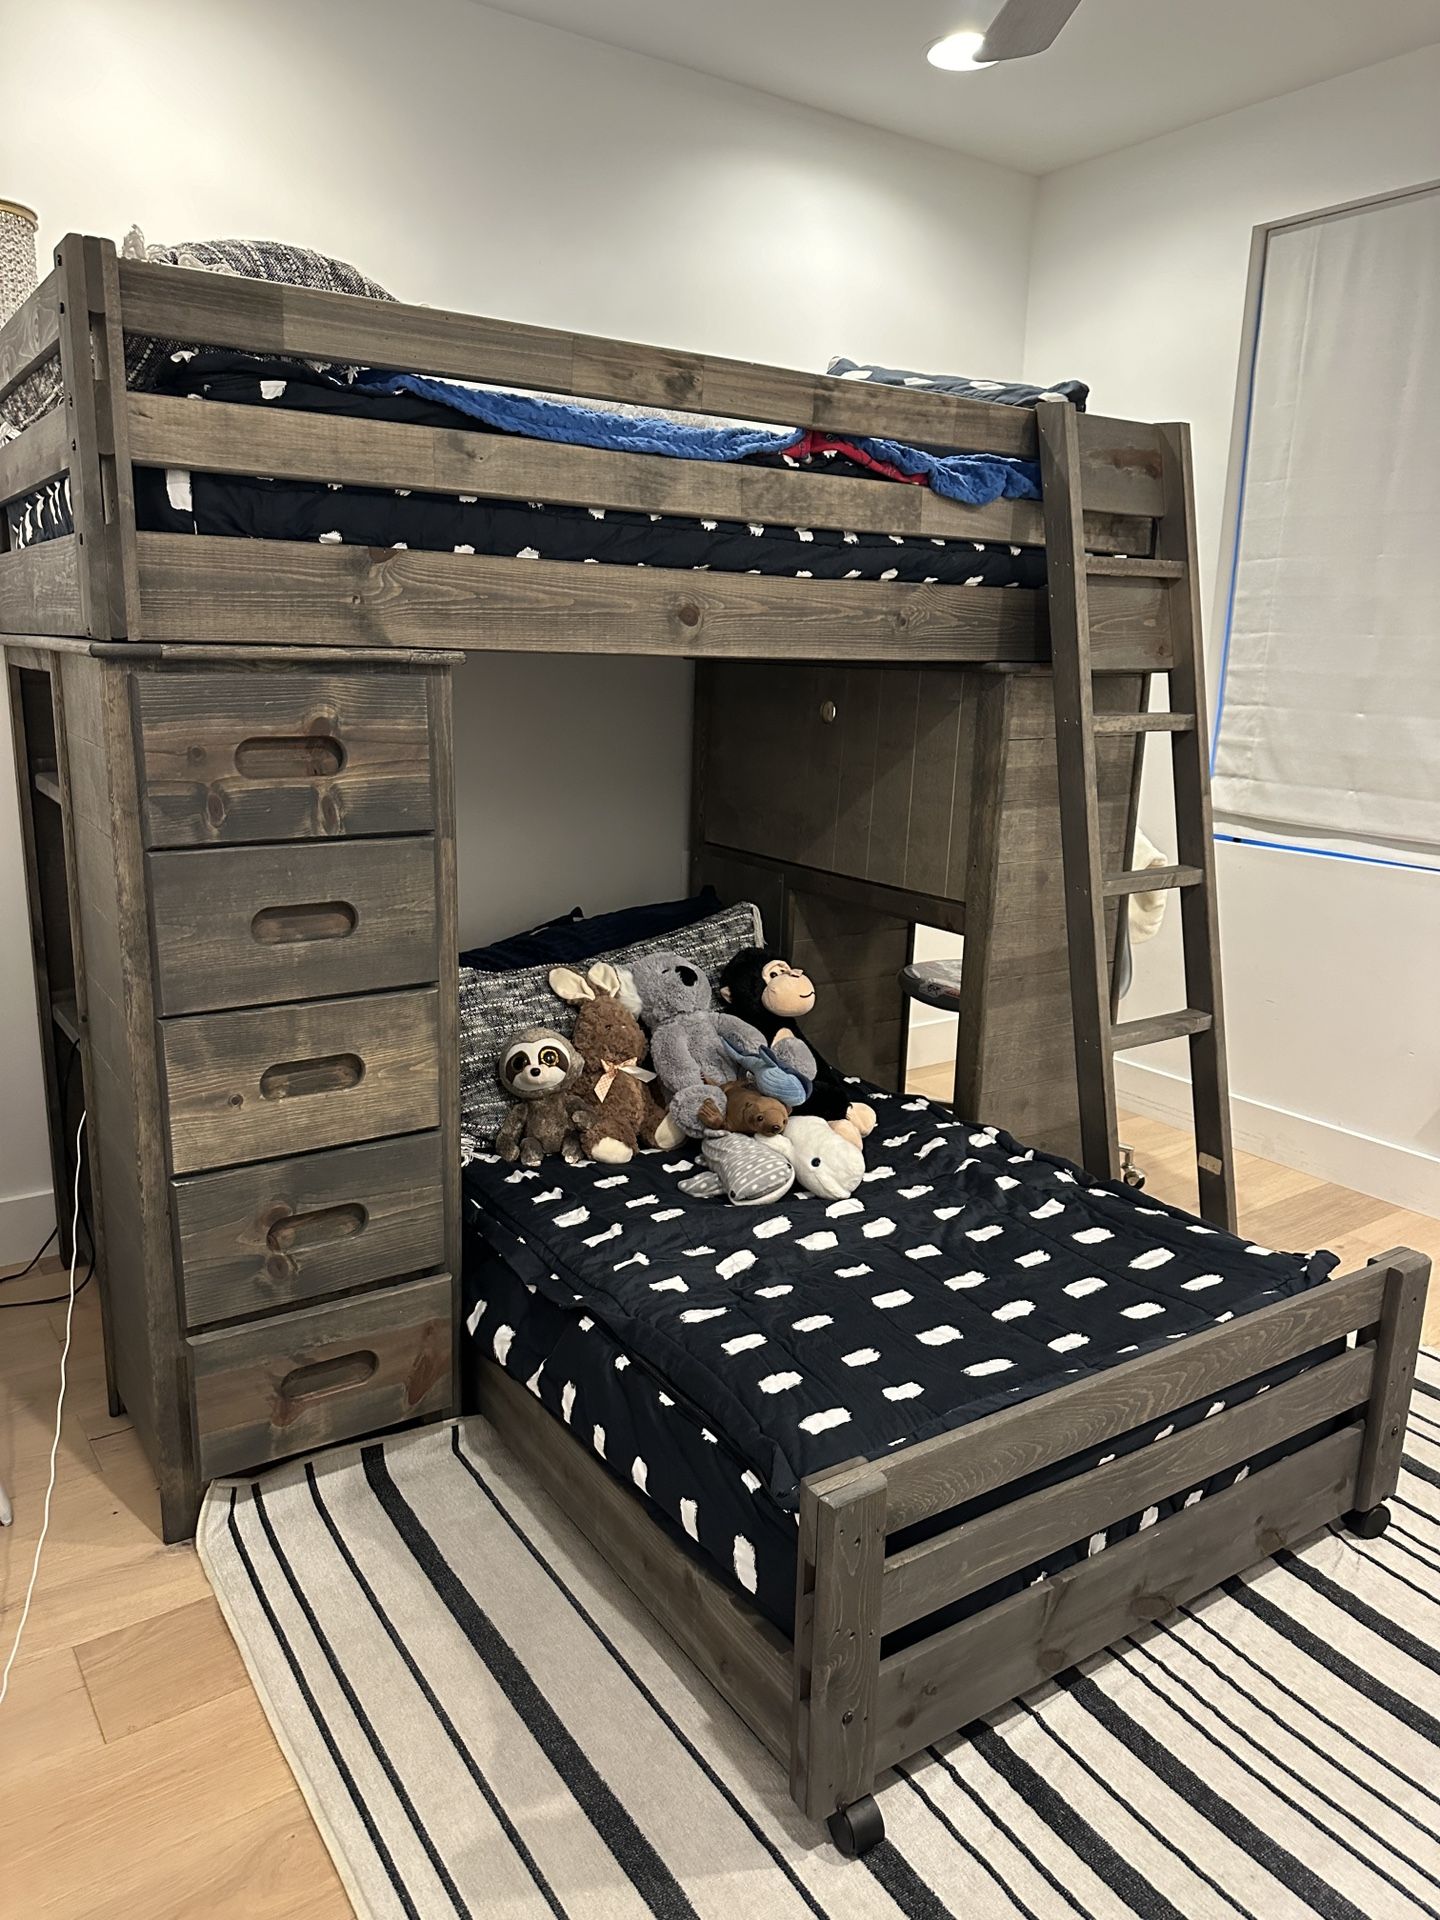 Twin Bunk Beds With Built In Desk ($100 Off If You Disassemble & Free Bedding!!)